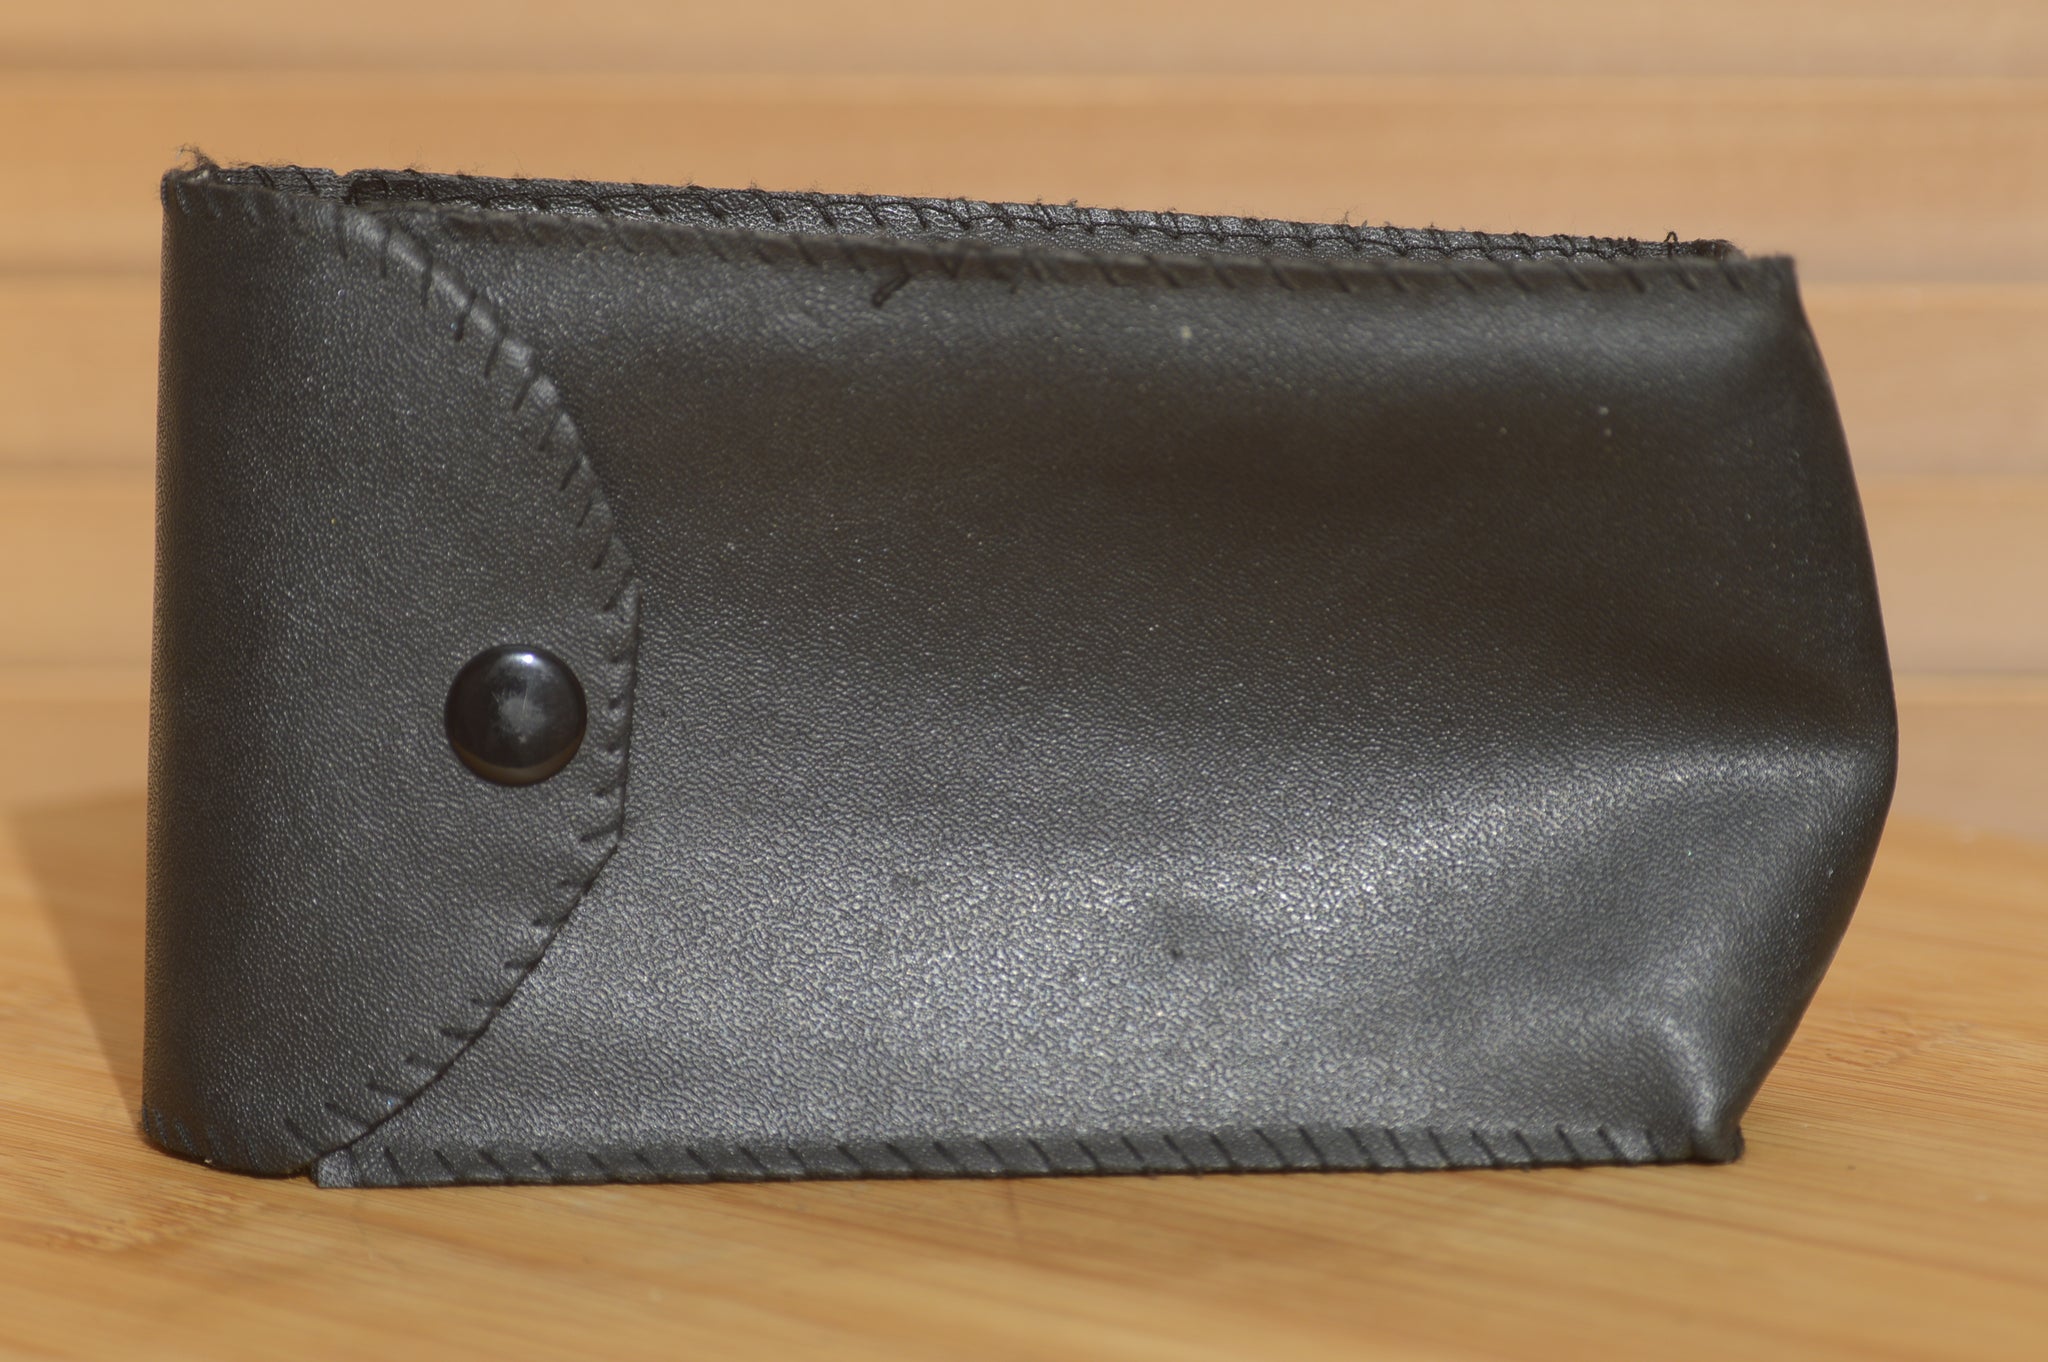 Vintage Black Compact Camera Case. Universal use for Cameras, flashes or light meters. - Rewind Cameras 